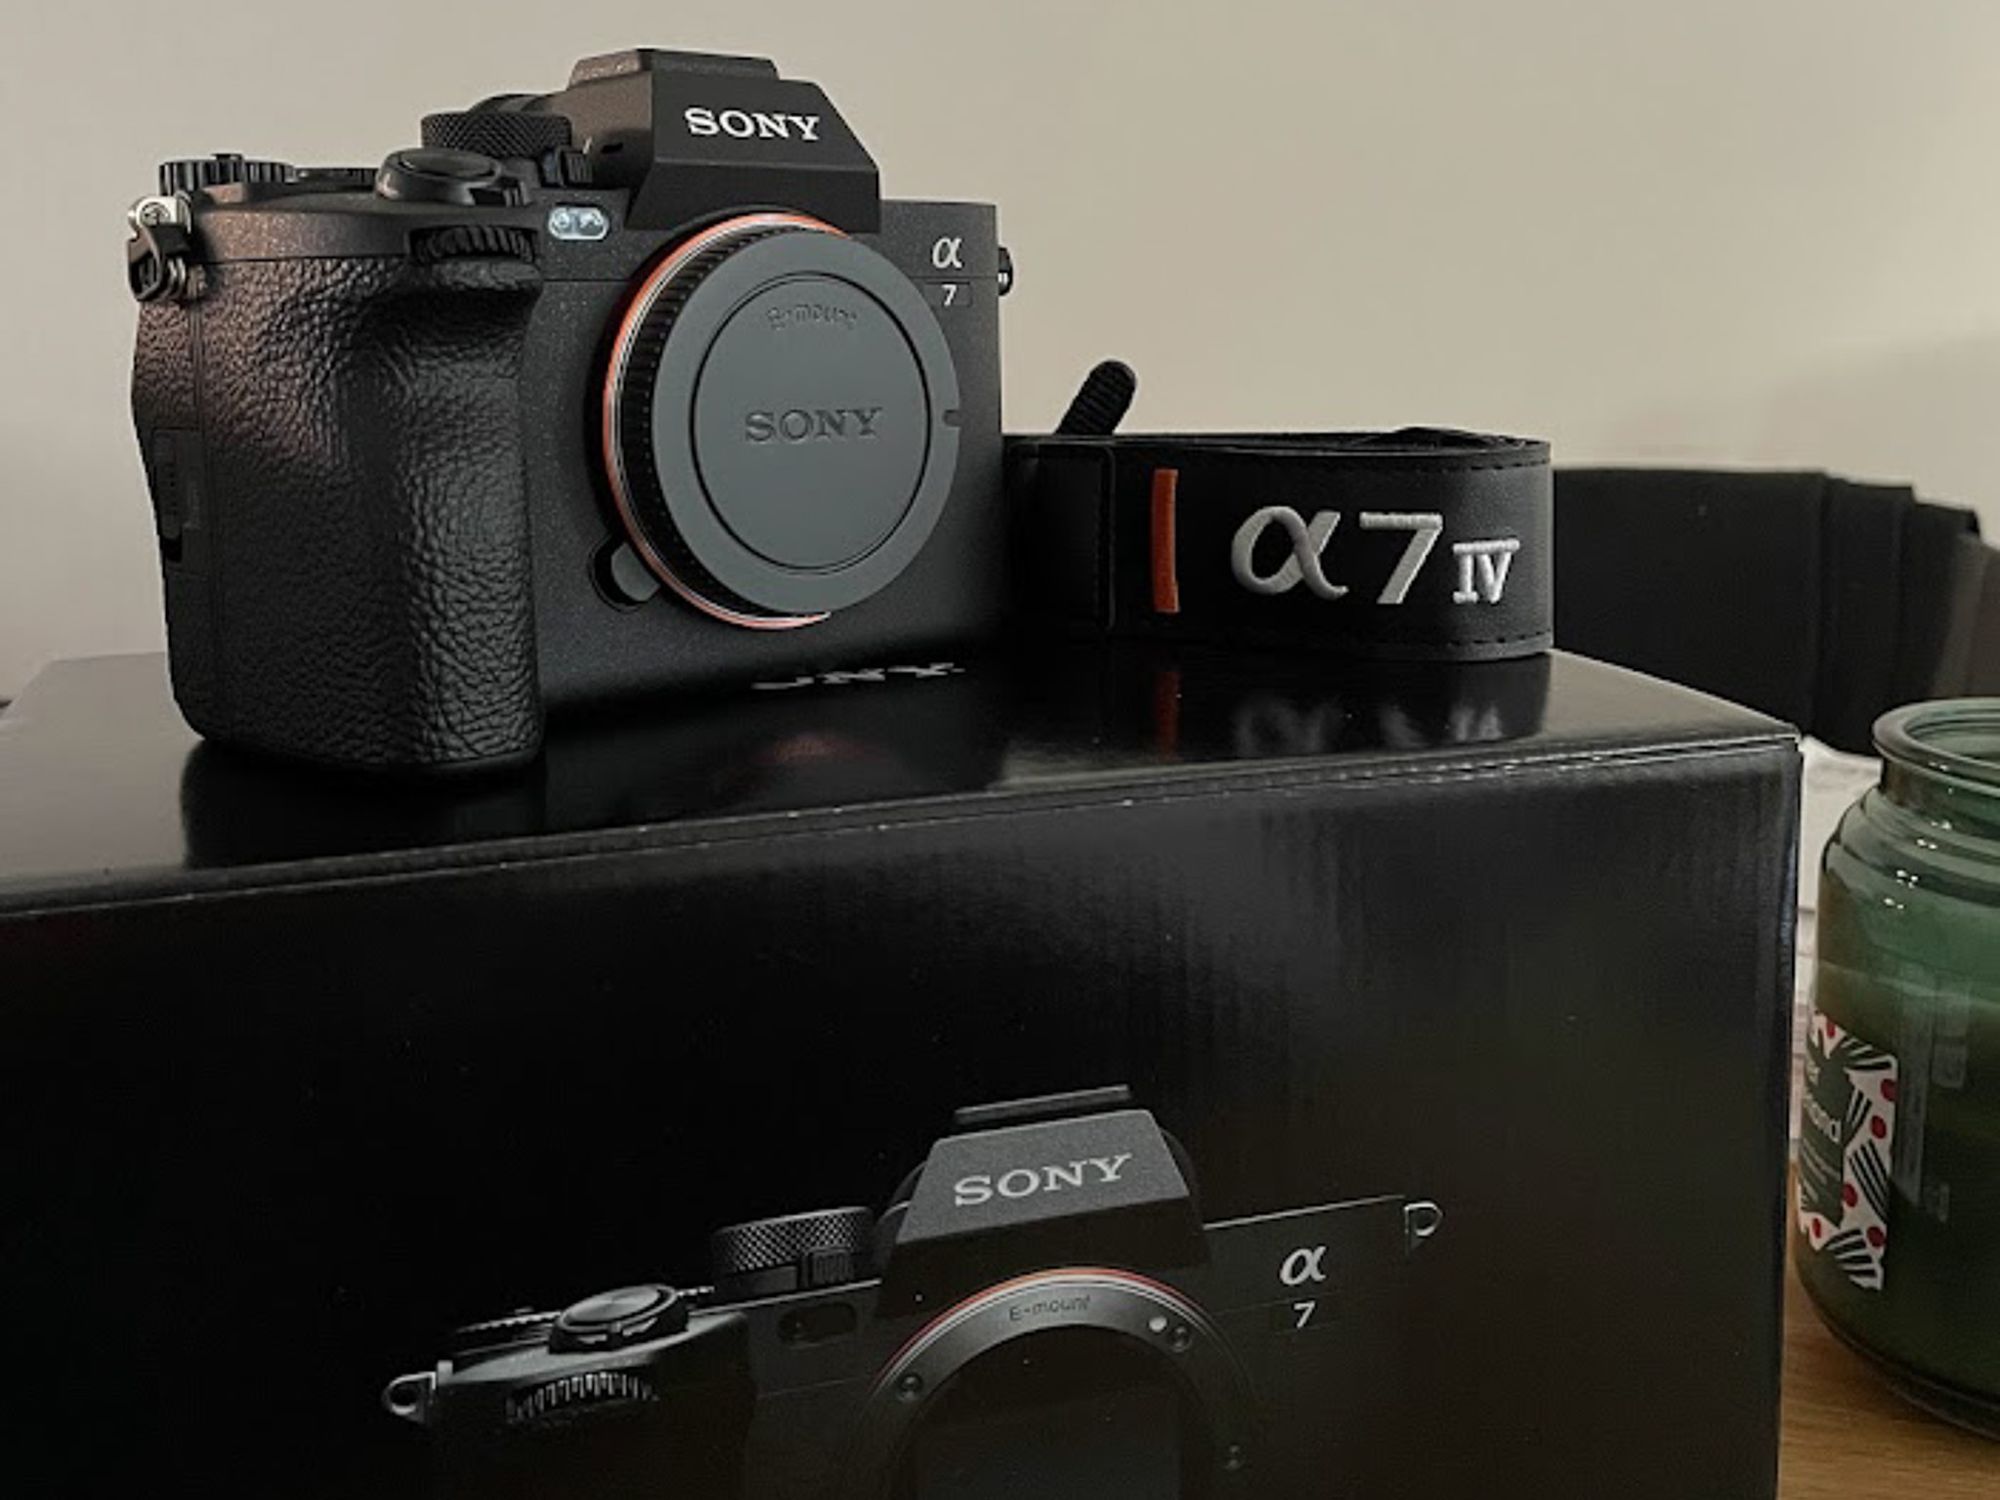 a photograph of a sony a7 iv camera on the box it came with